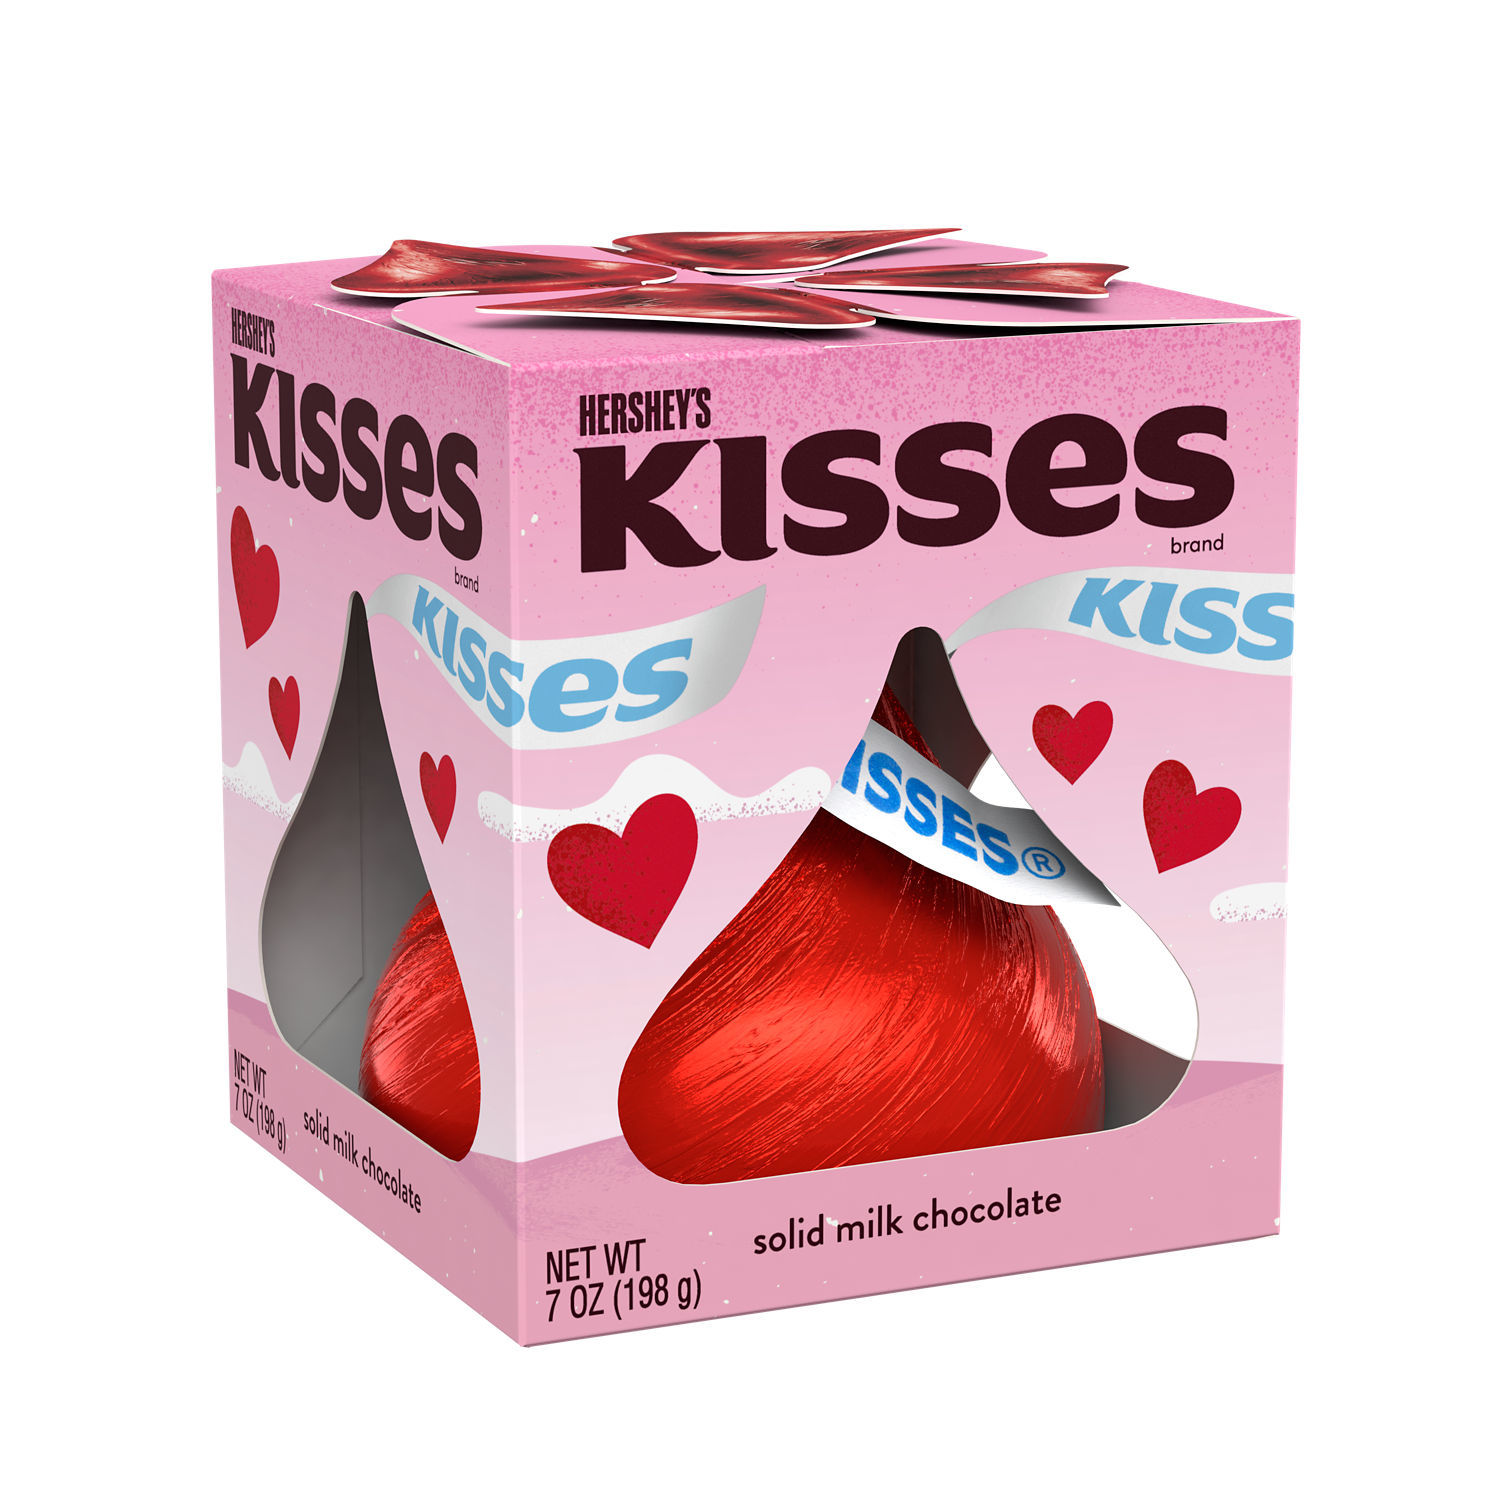 Hershey's Kisses Solid Milk Chocolate Valentine's Day Candy, Gift Box 7 oz - image 1 of 6